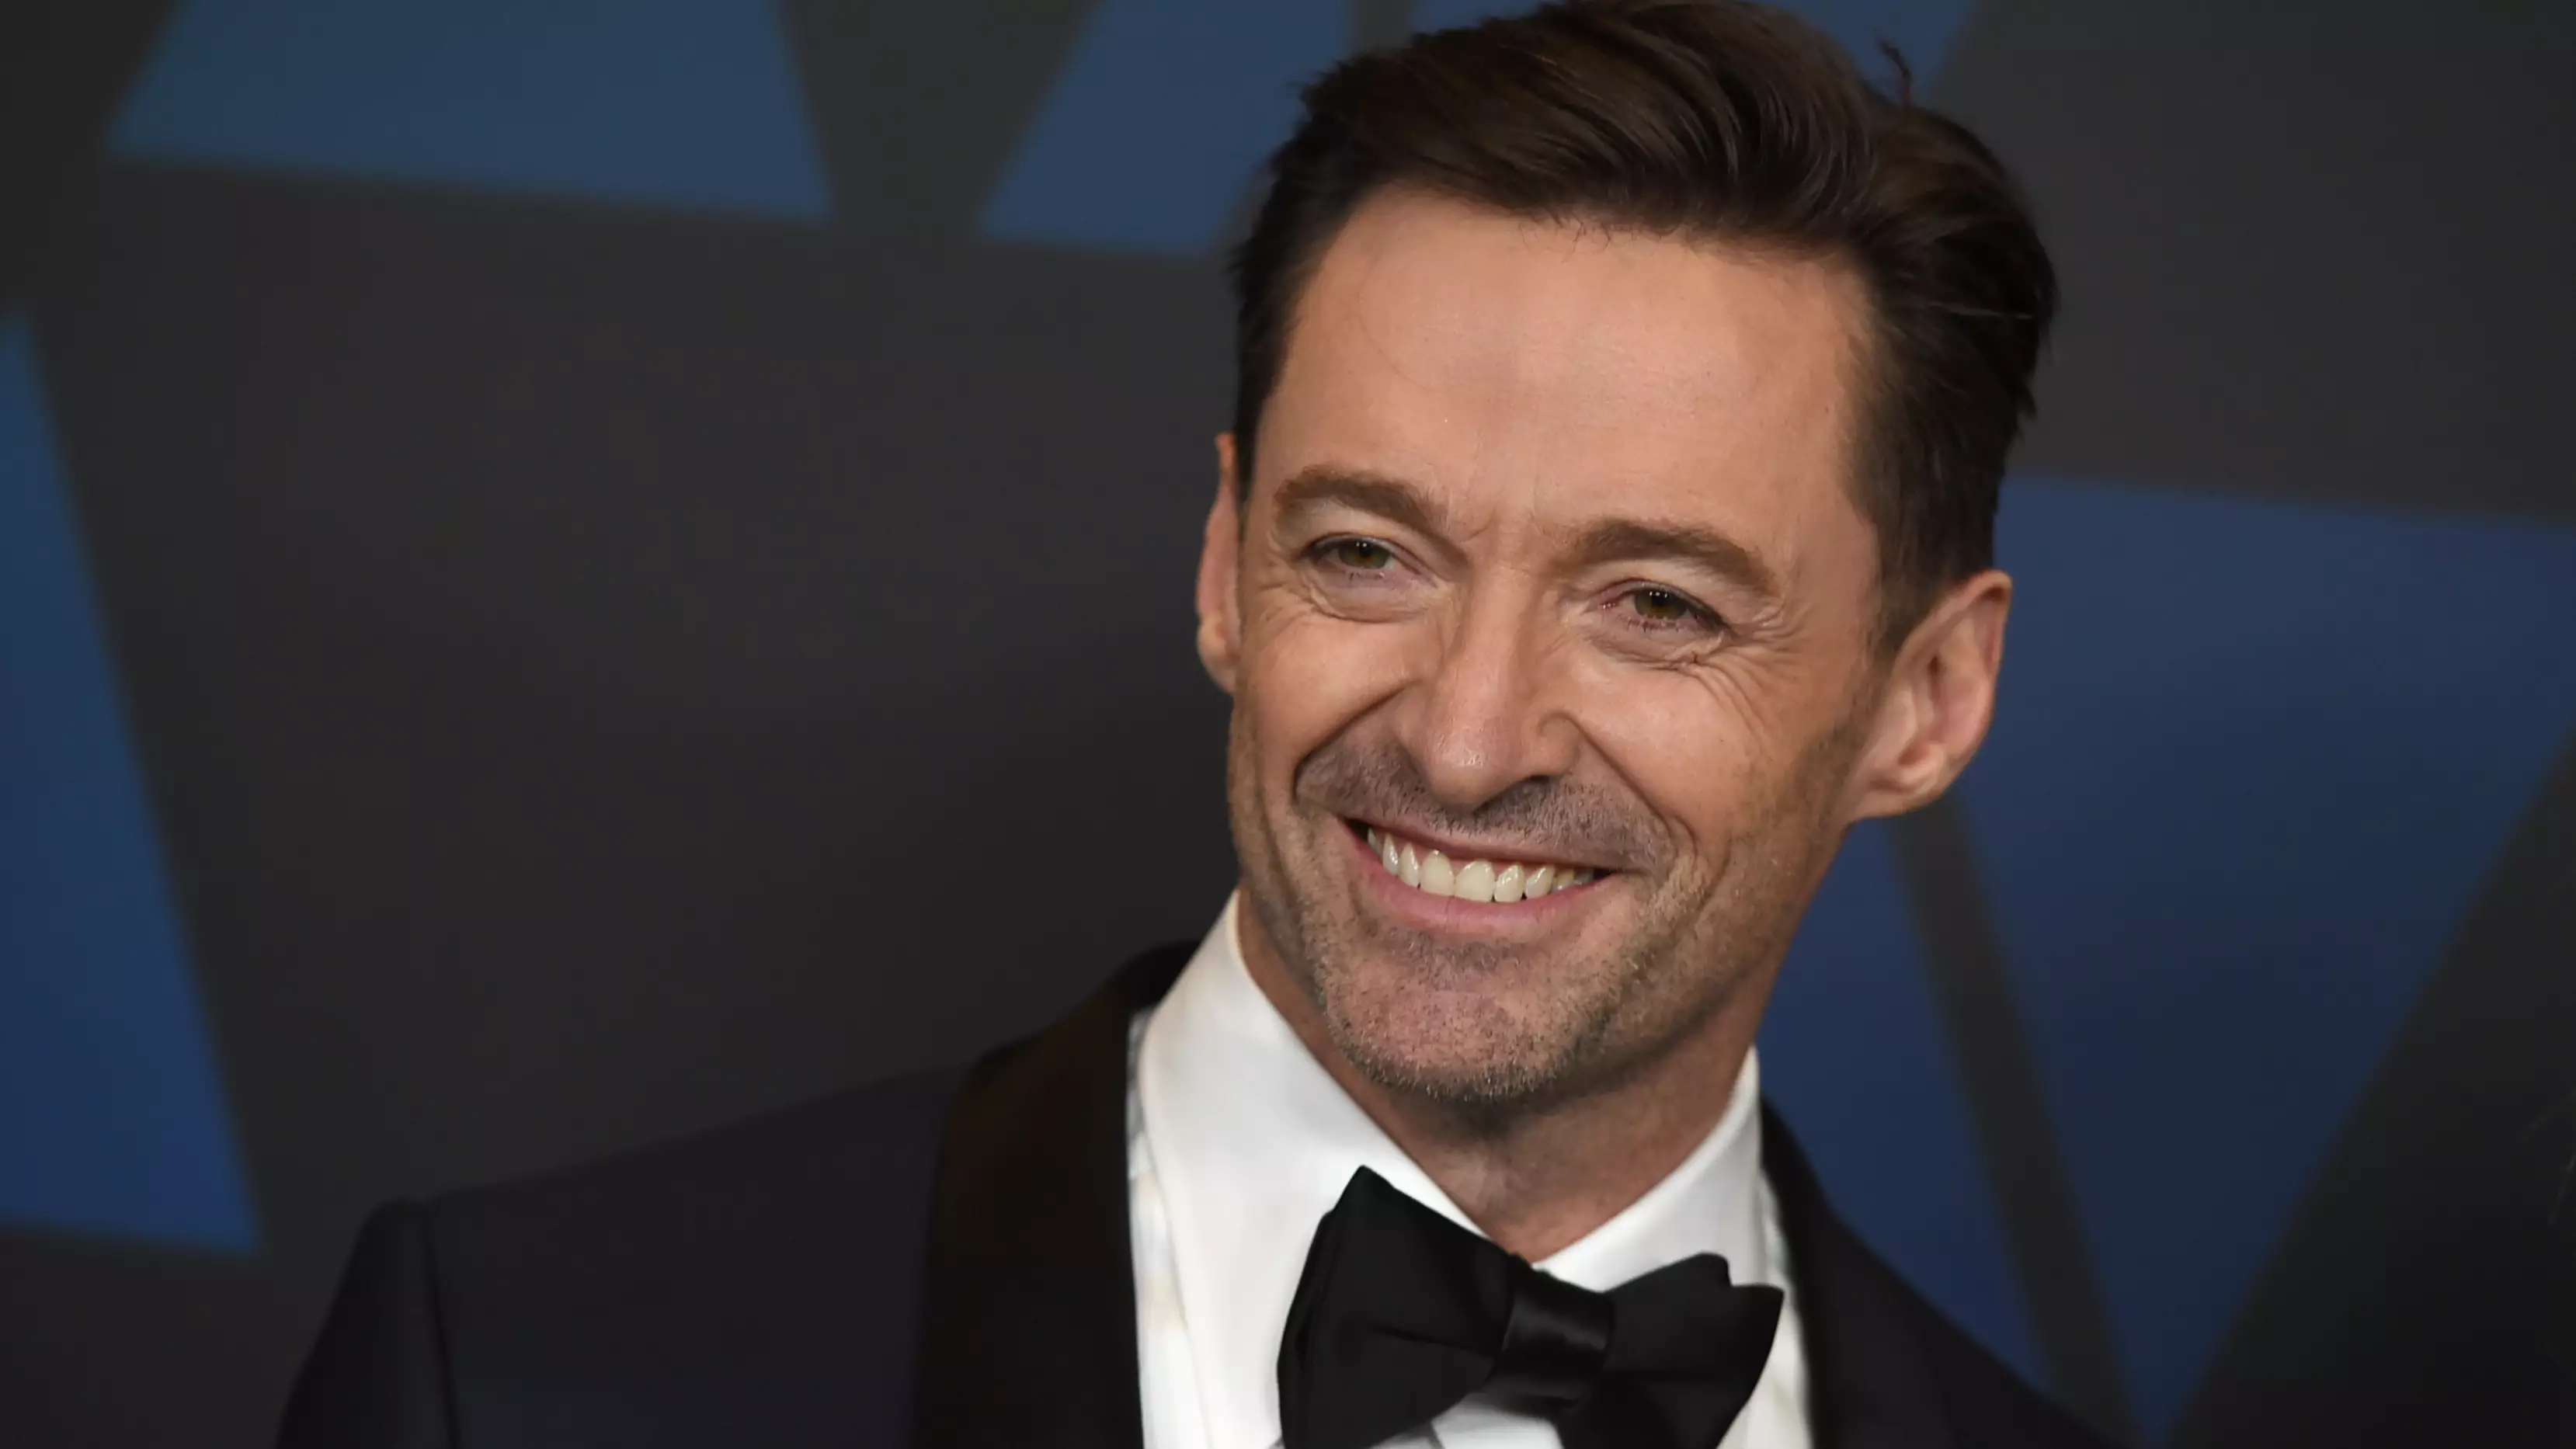 Hugh Jackman's First UK Tour Is Happening In 2019 - Here's How To Get Tickets